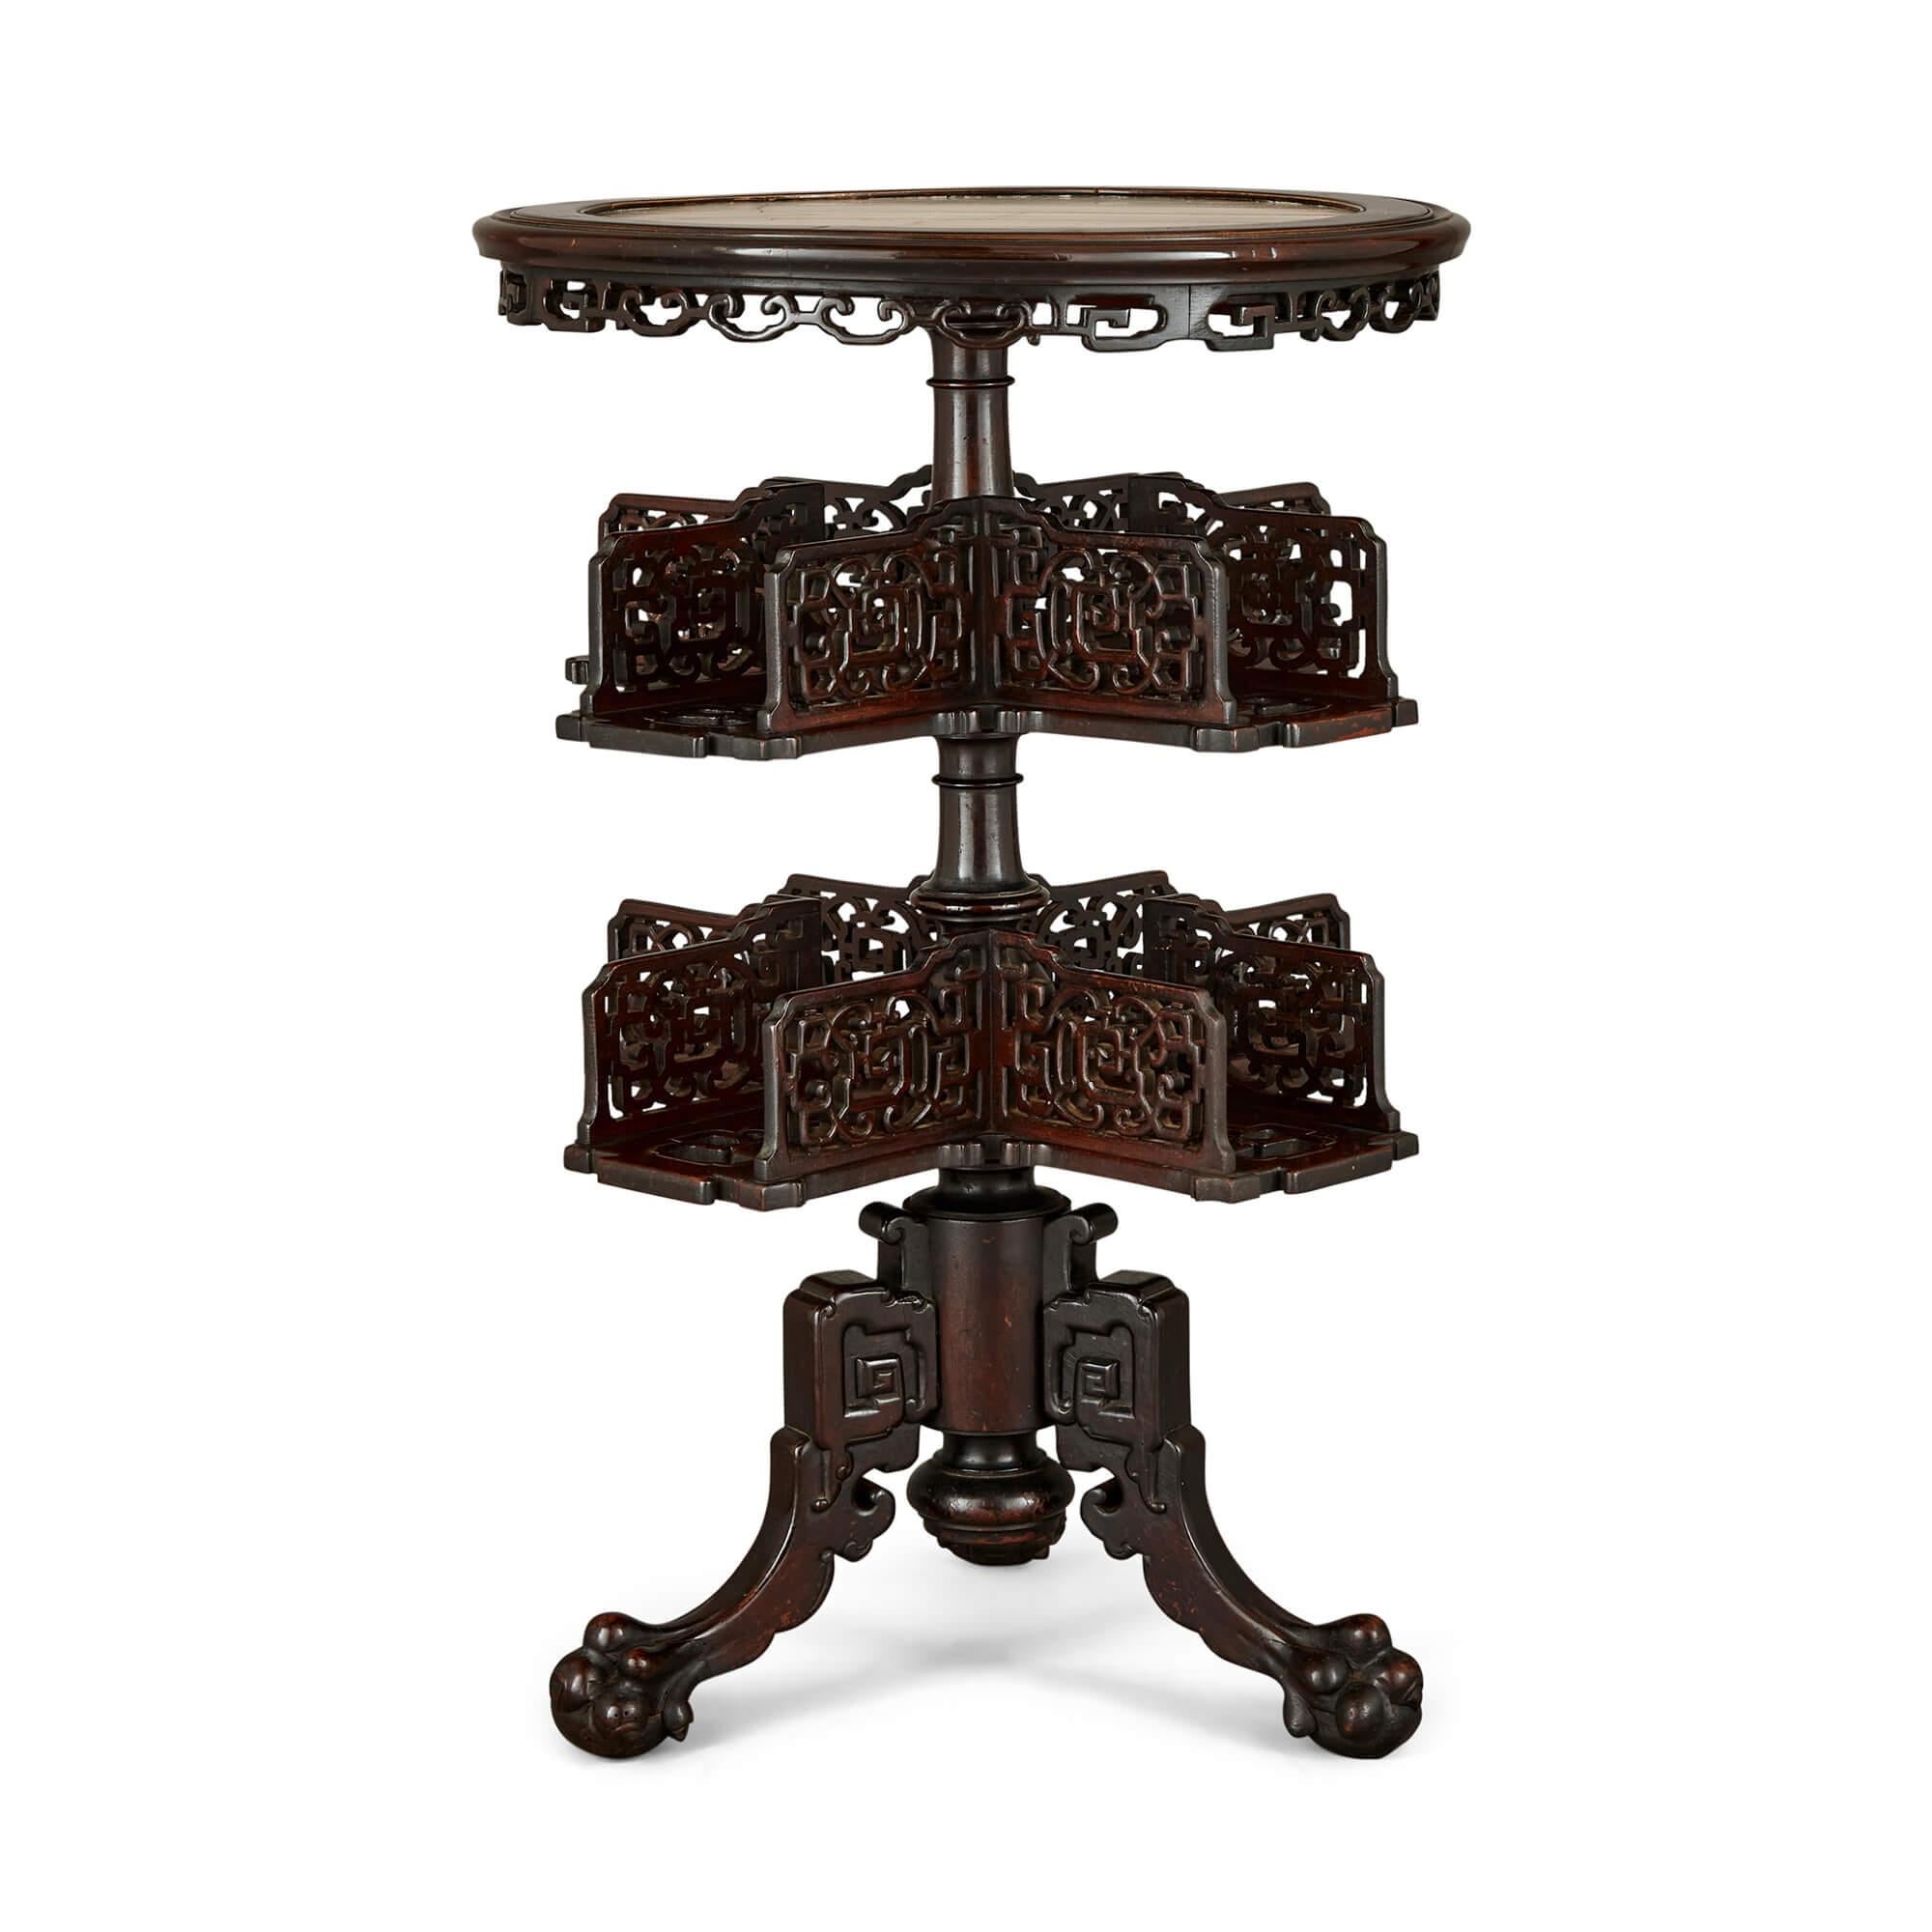 Two carved wood, marble and onyx Chinese tables
Chinese, Early 20th Century 
Height 77cm, diameter 51cm

Intricately carved and elegantly formed, the two Chinese tables feature round tabletops inlaid with brightly coloured marble and